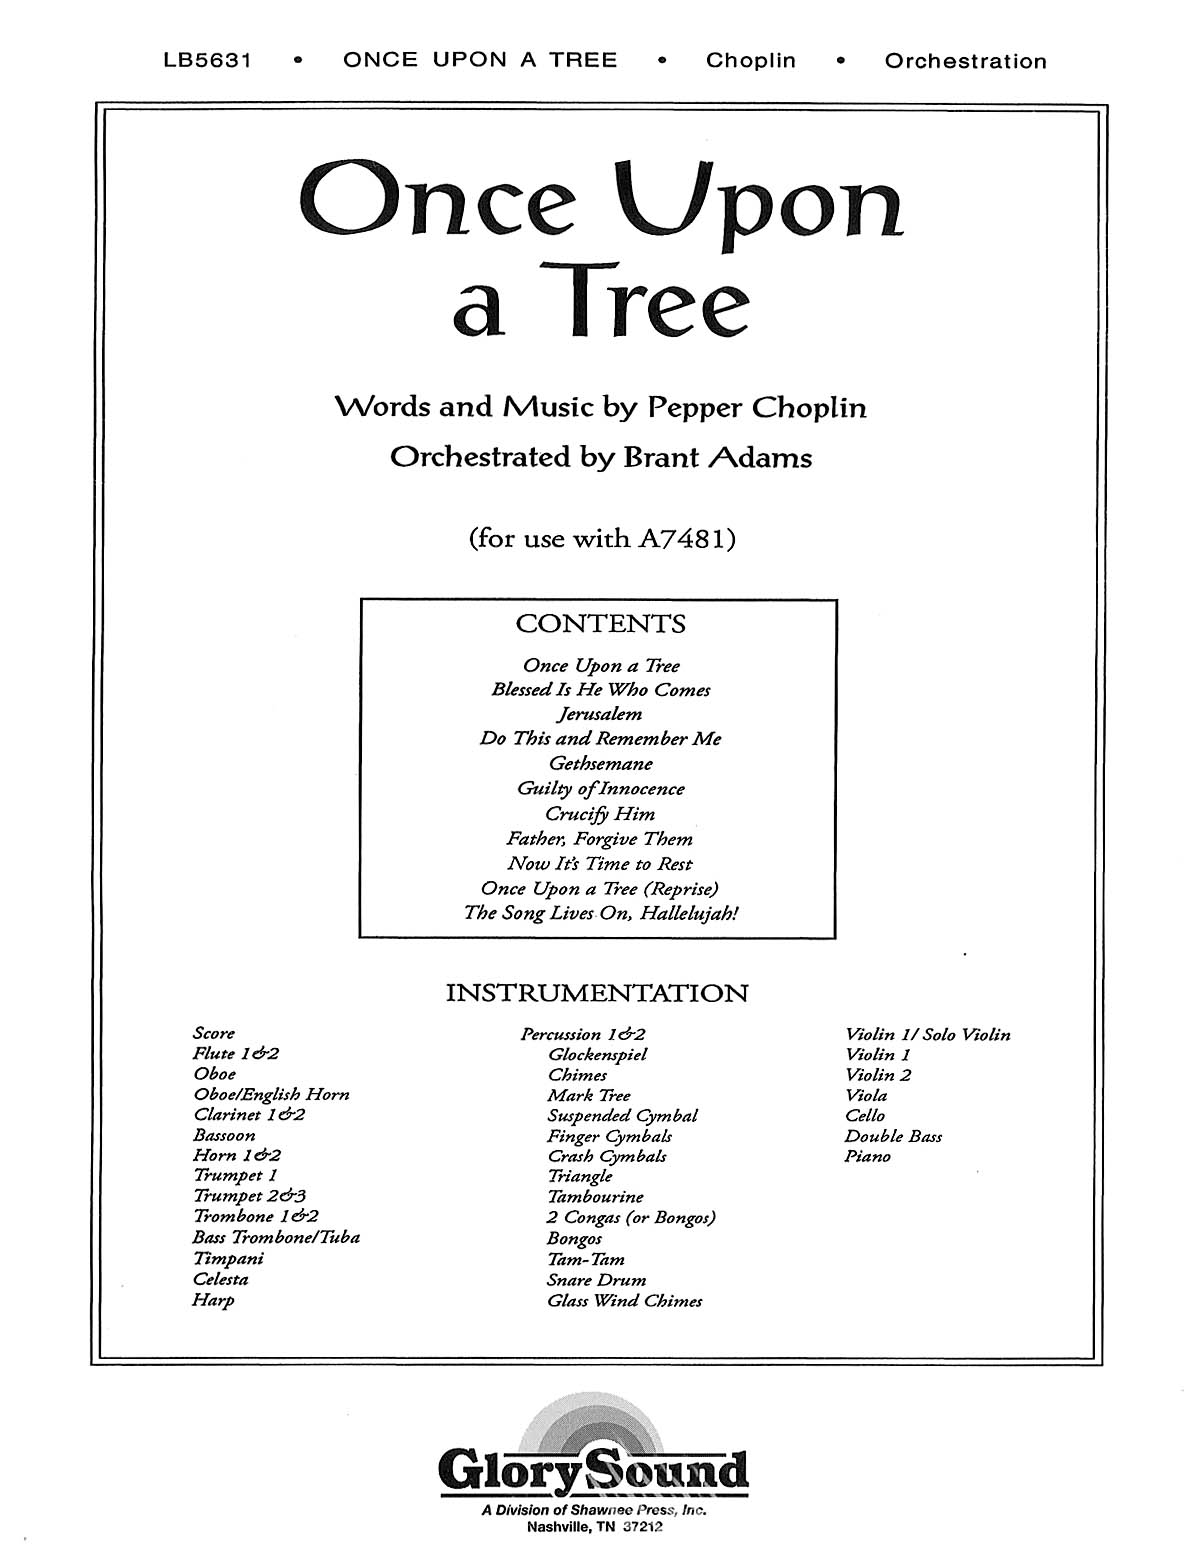 Pepper Choplin: Once Upon a Tree: Orchestra: Parts